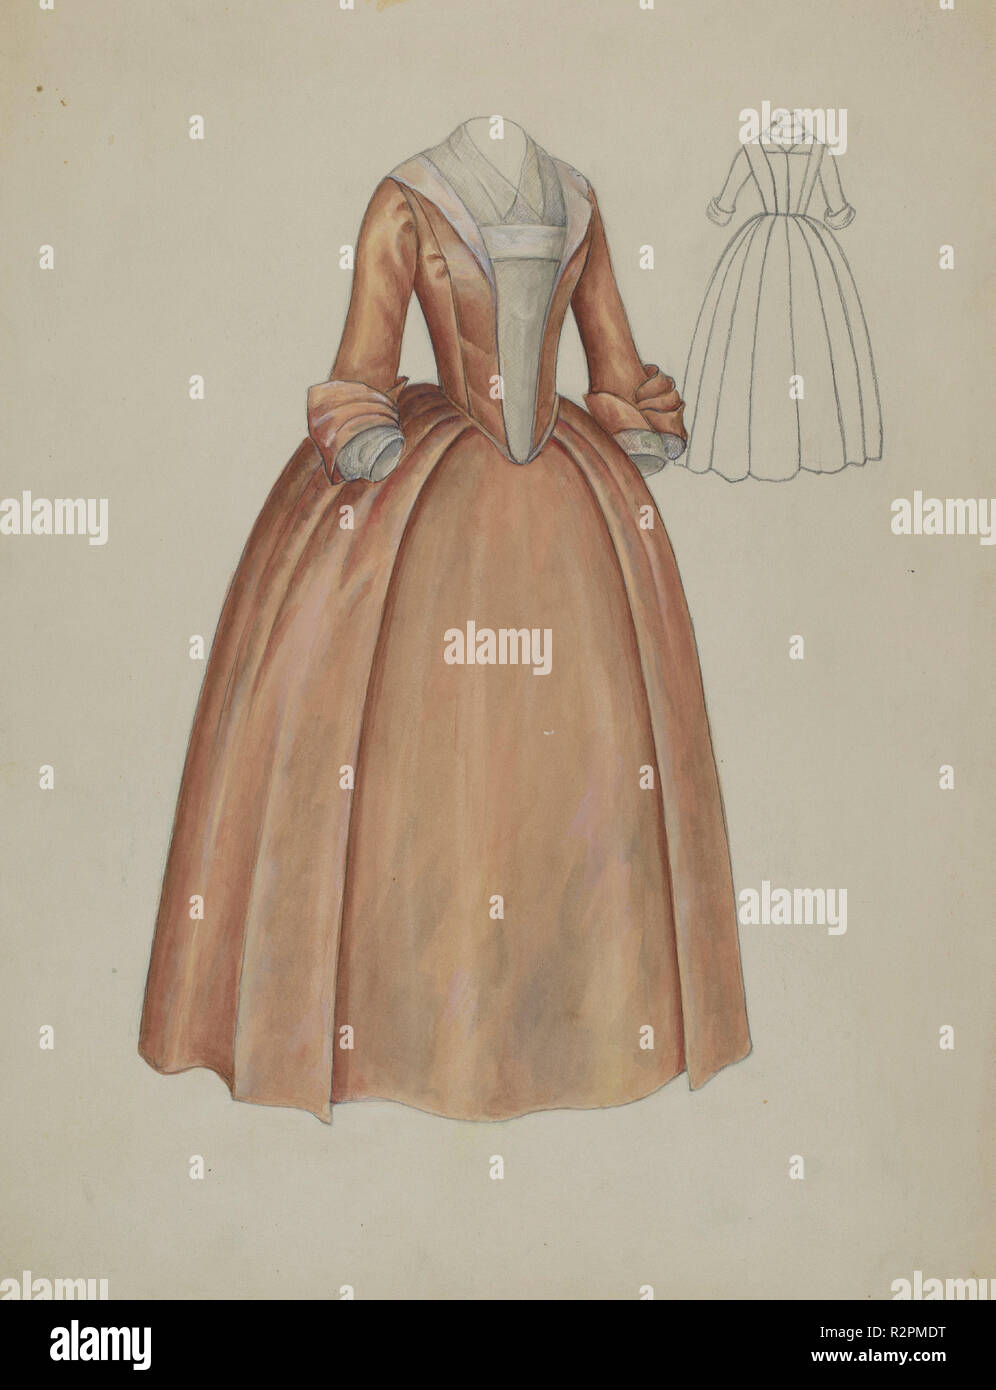 Dress. Dated: c. 1936. Dimensions: overall: 30.4 x 22.9 cm (11 15/16 x 9 in.). Medium: watercolor, graphite, and gouache on paperboard. Museum: National Gallery of Art, Washington DC. Author: Jessie M. Benge. Stock Photo